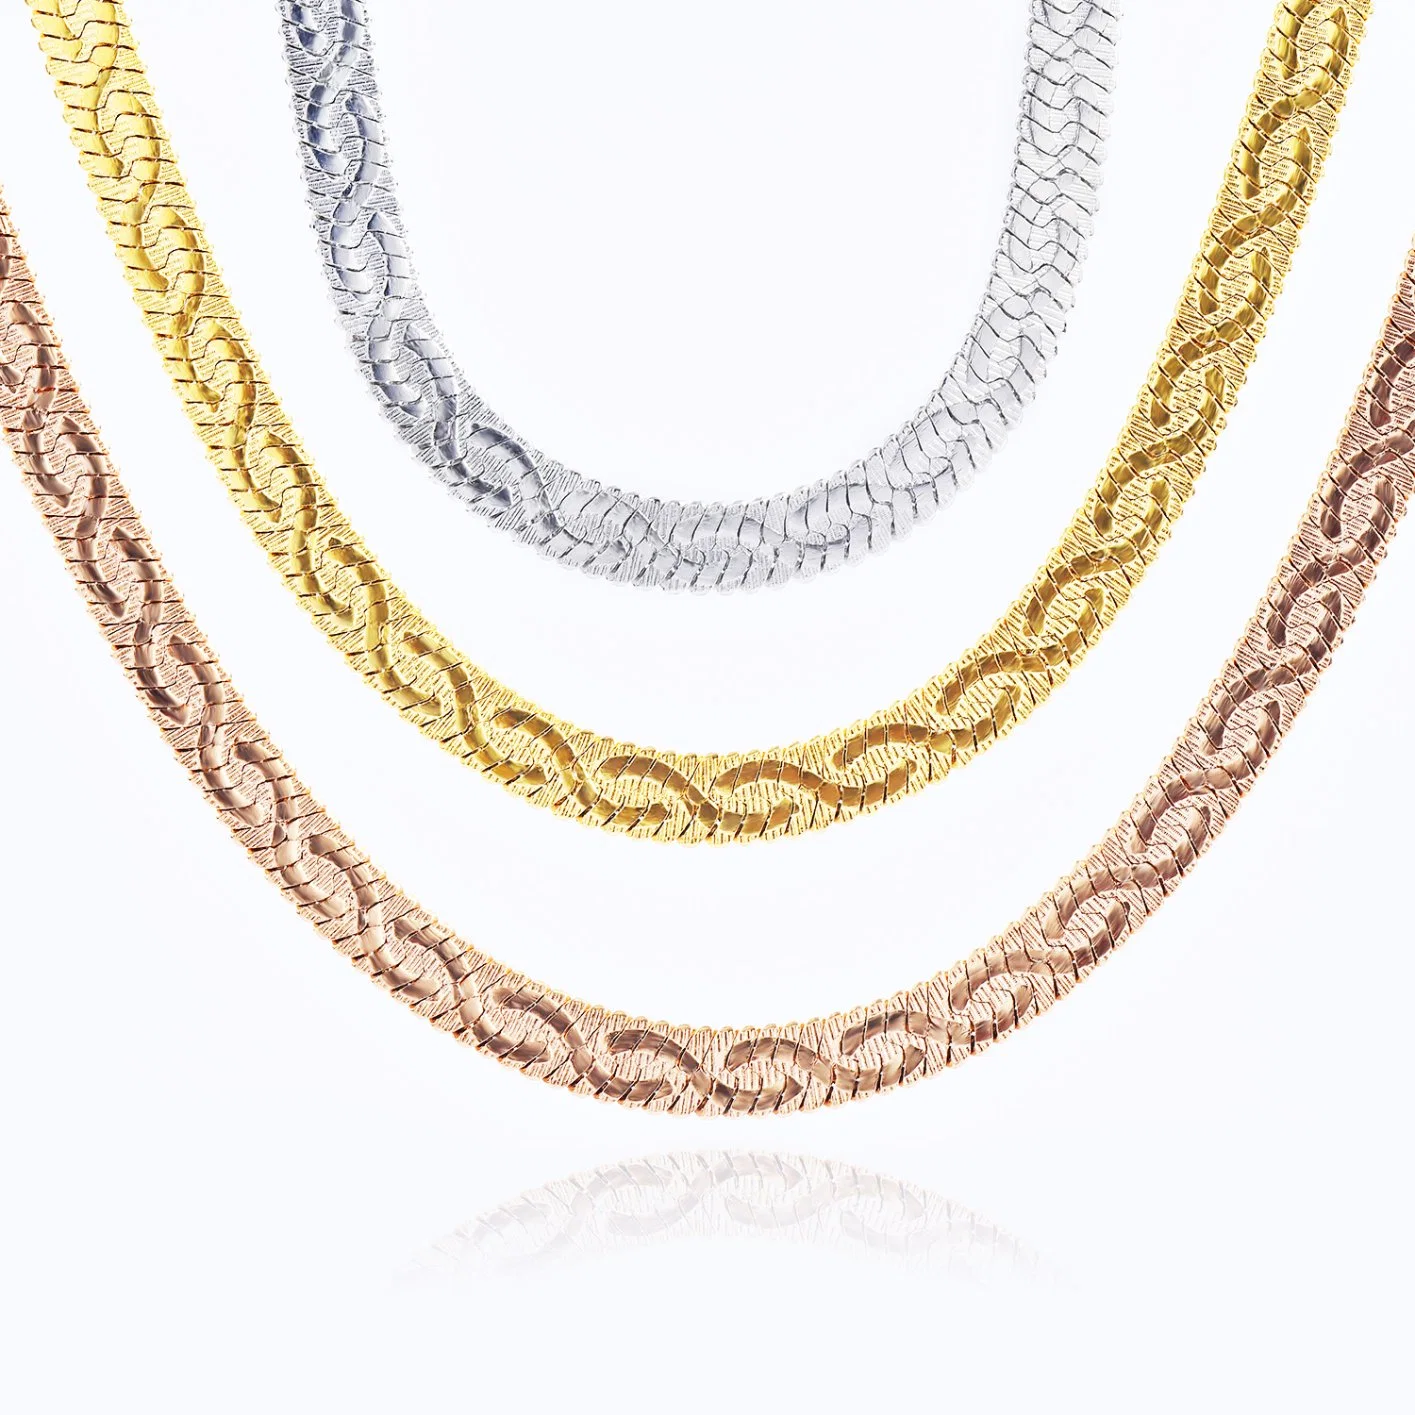 Wholesale Popular Gold Plated Fashion Jewelry Chain Ultra New Embossed Flat Thin Herringbone Chains Necklace for Bracelet Bag Costume Decoration